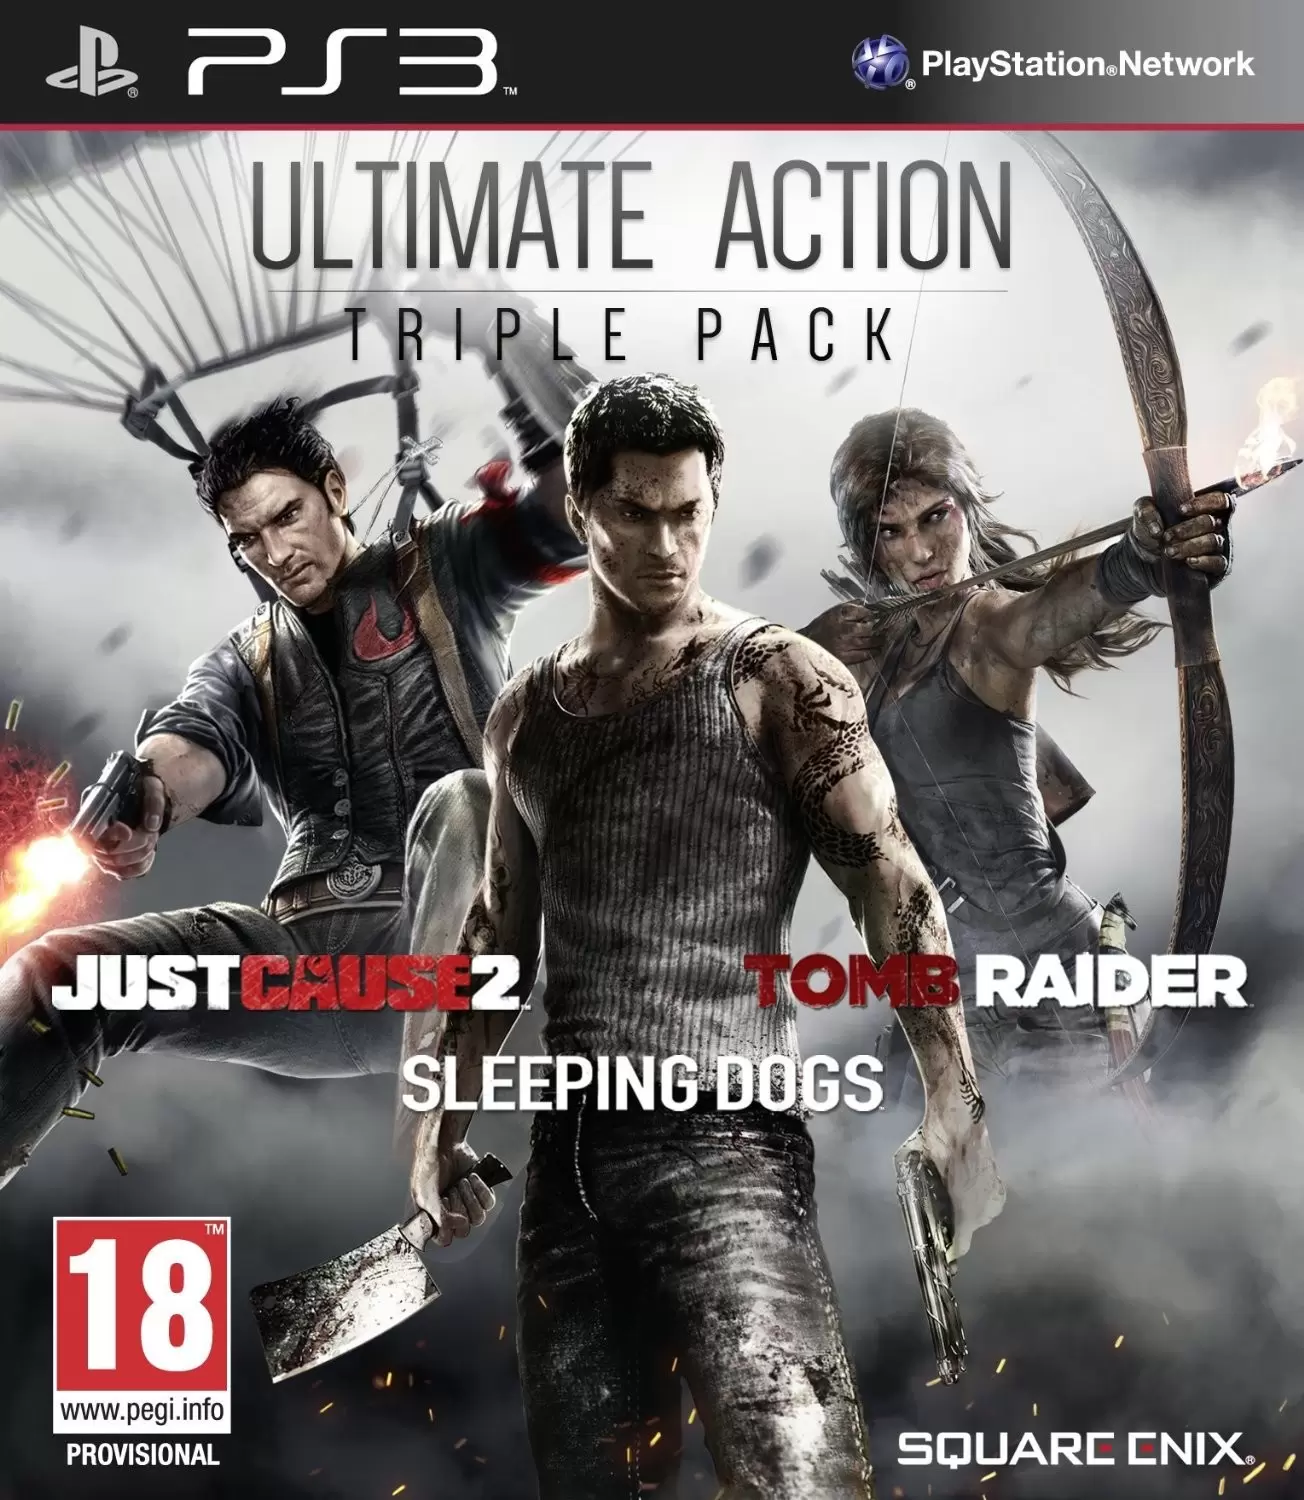 PS3 Games - Ultimate Action Triple Pack